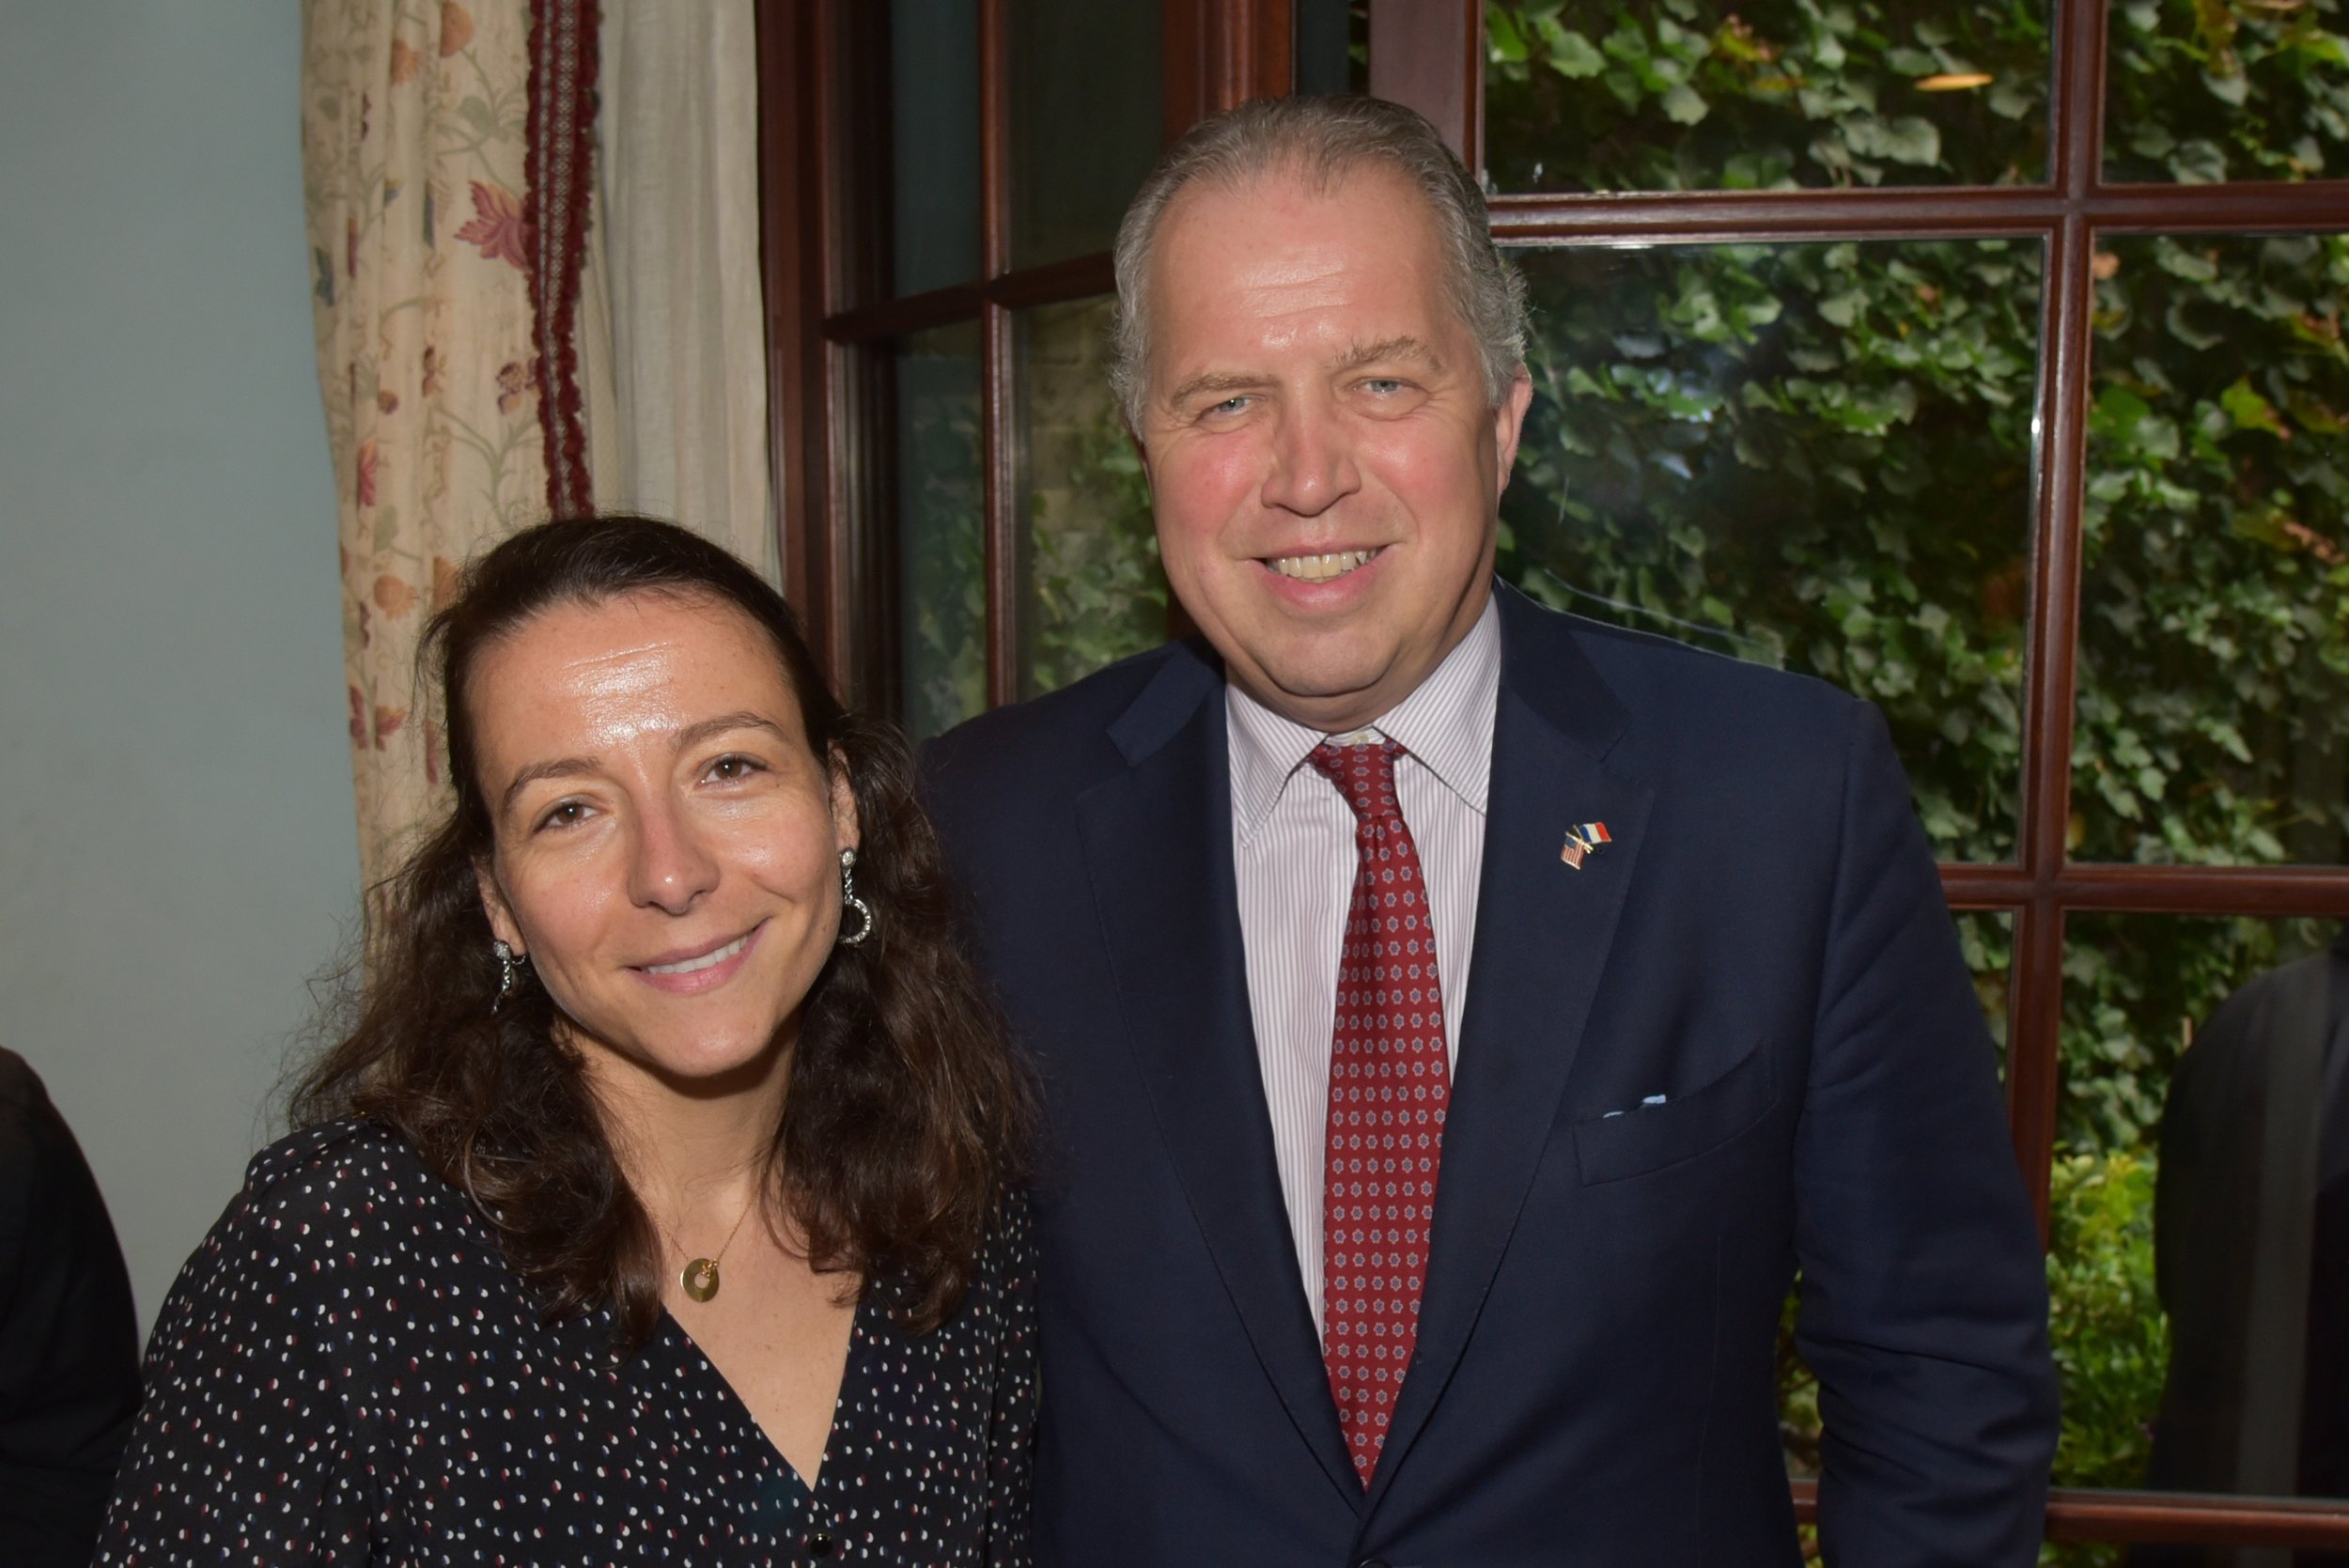  Camile Mantelin, James Gerard at American Friends of Blérancourt Garden Party at Sonja Tremont-Morgan residence in New York on 06/06/2017 (photo by Annie Watt Agency / Sipa USA 